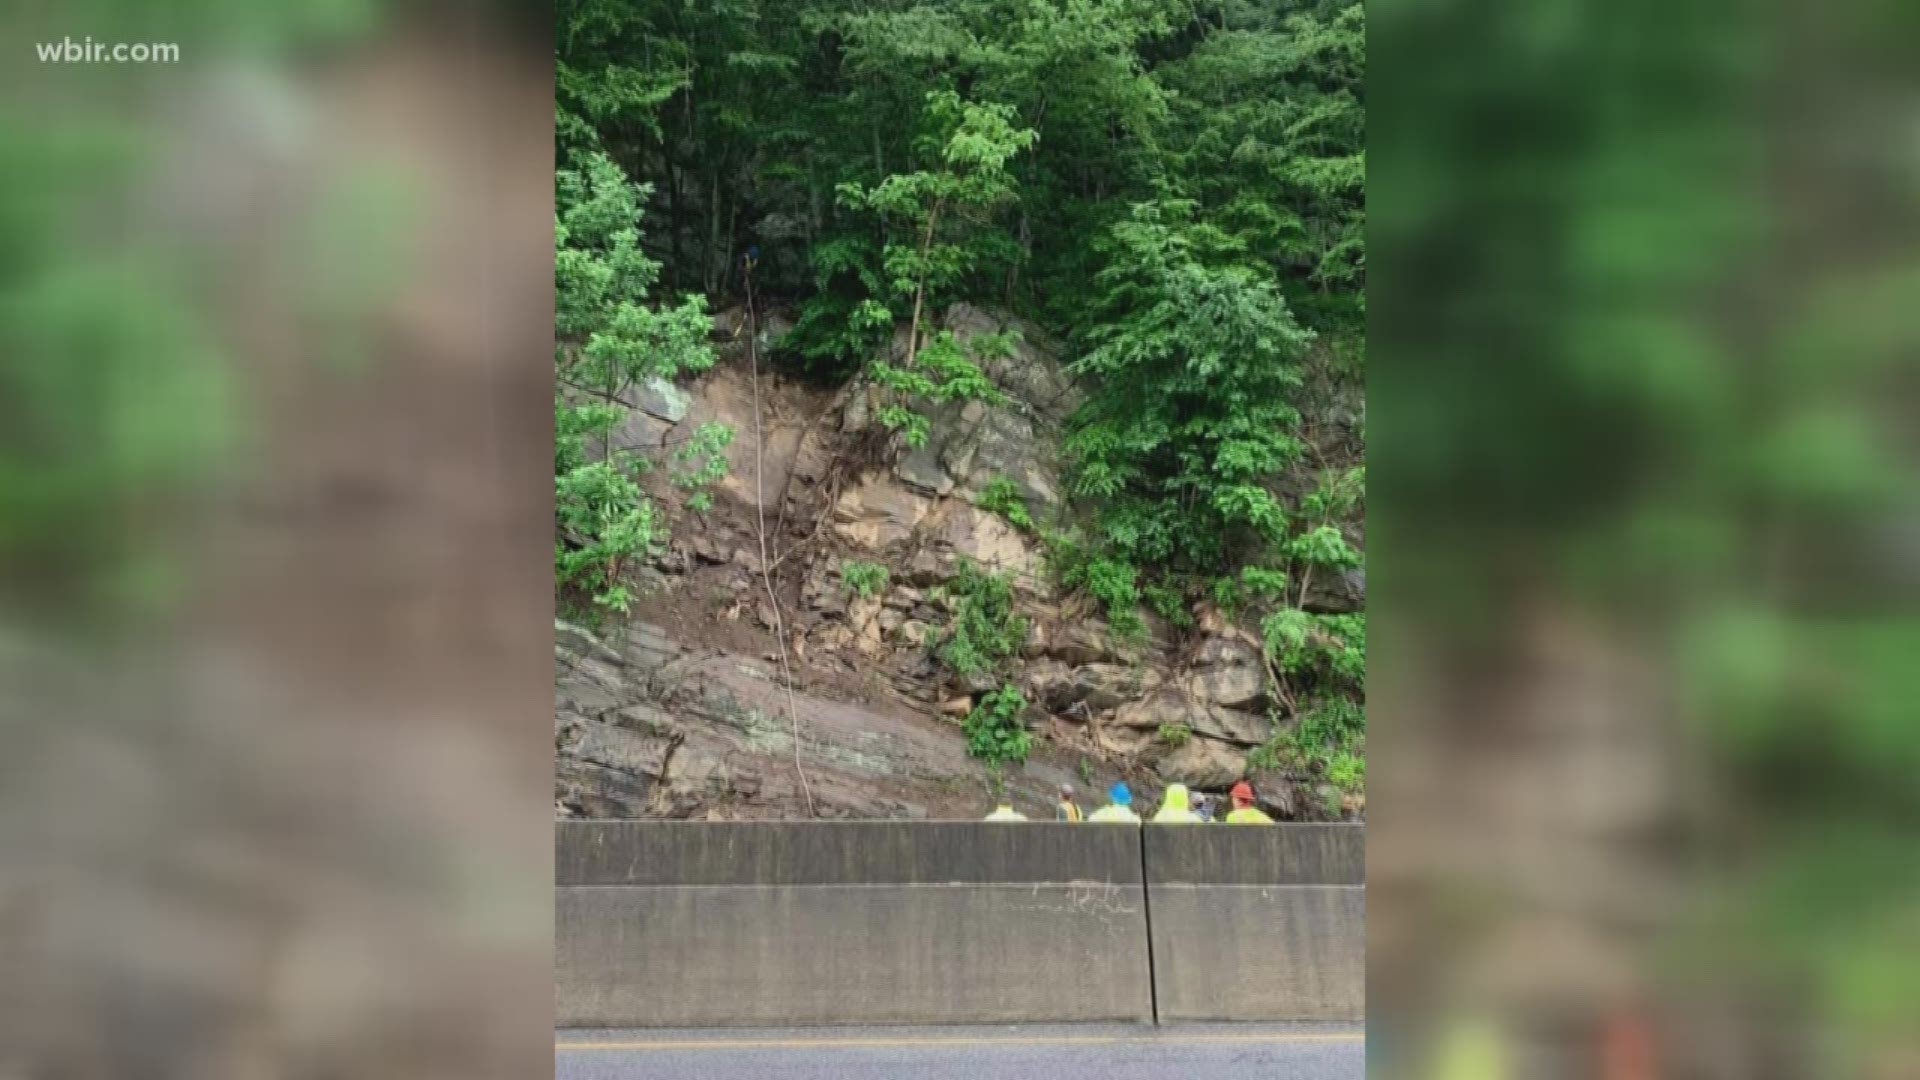 NCDOT blames the heavy rain for causing the slide, saying it expects to have it cleared by the end of the night.